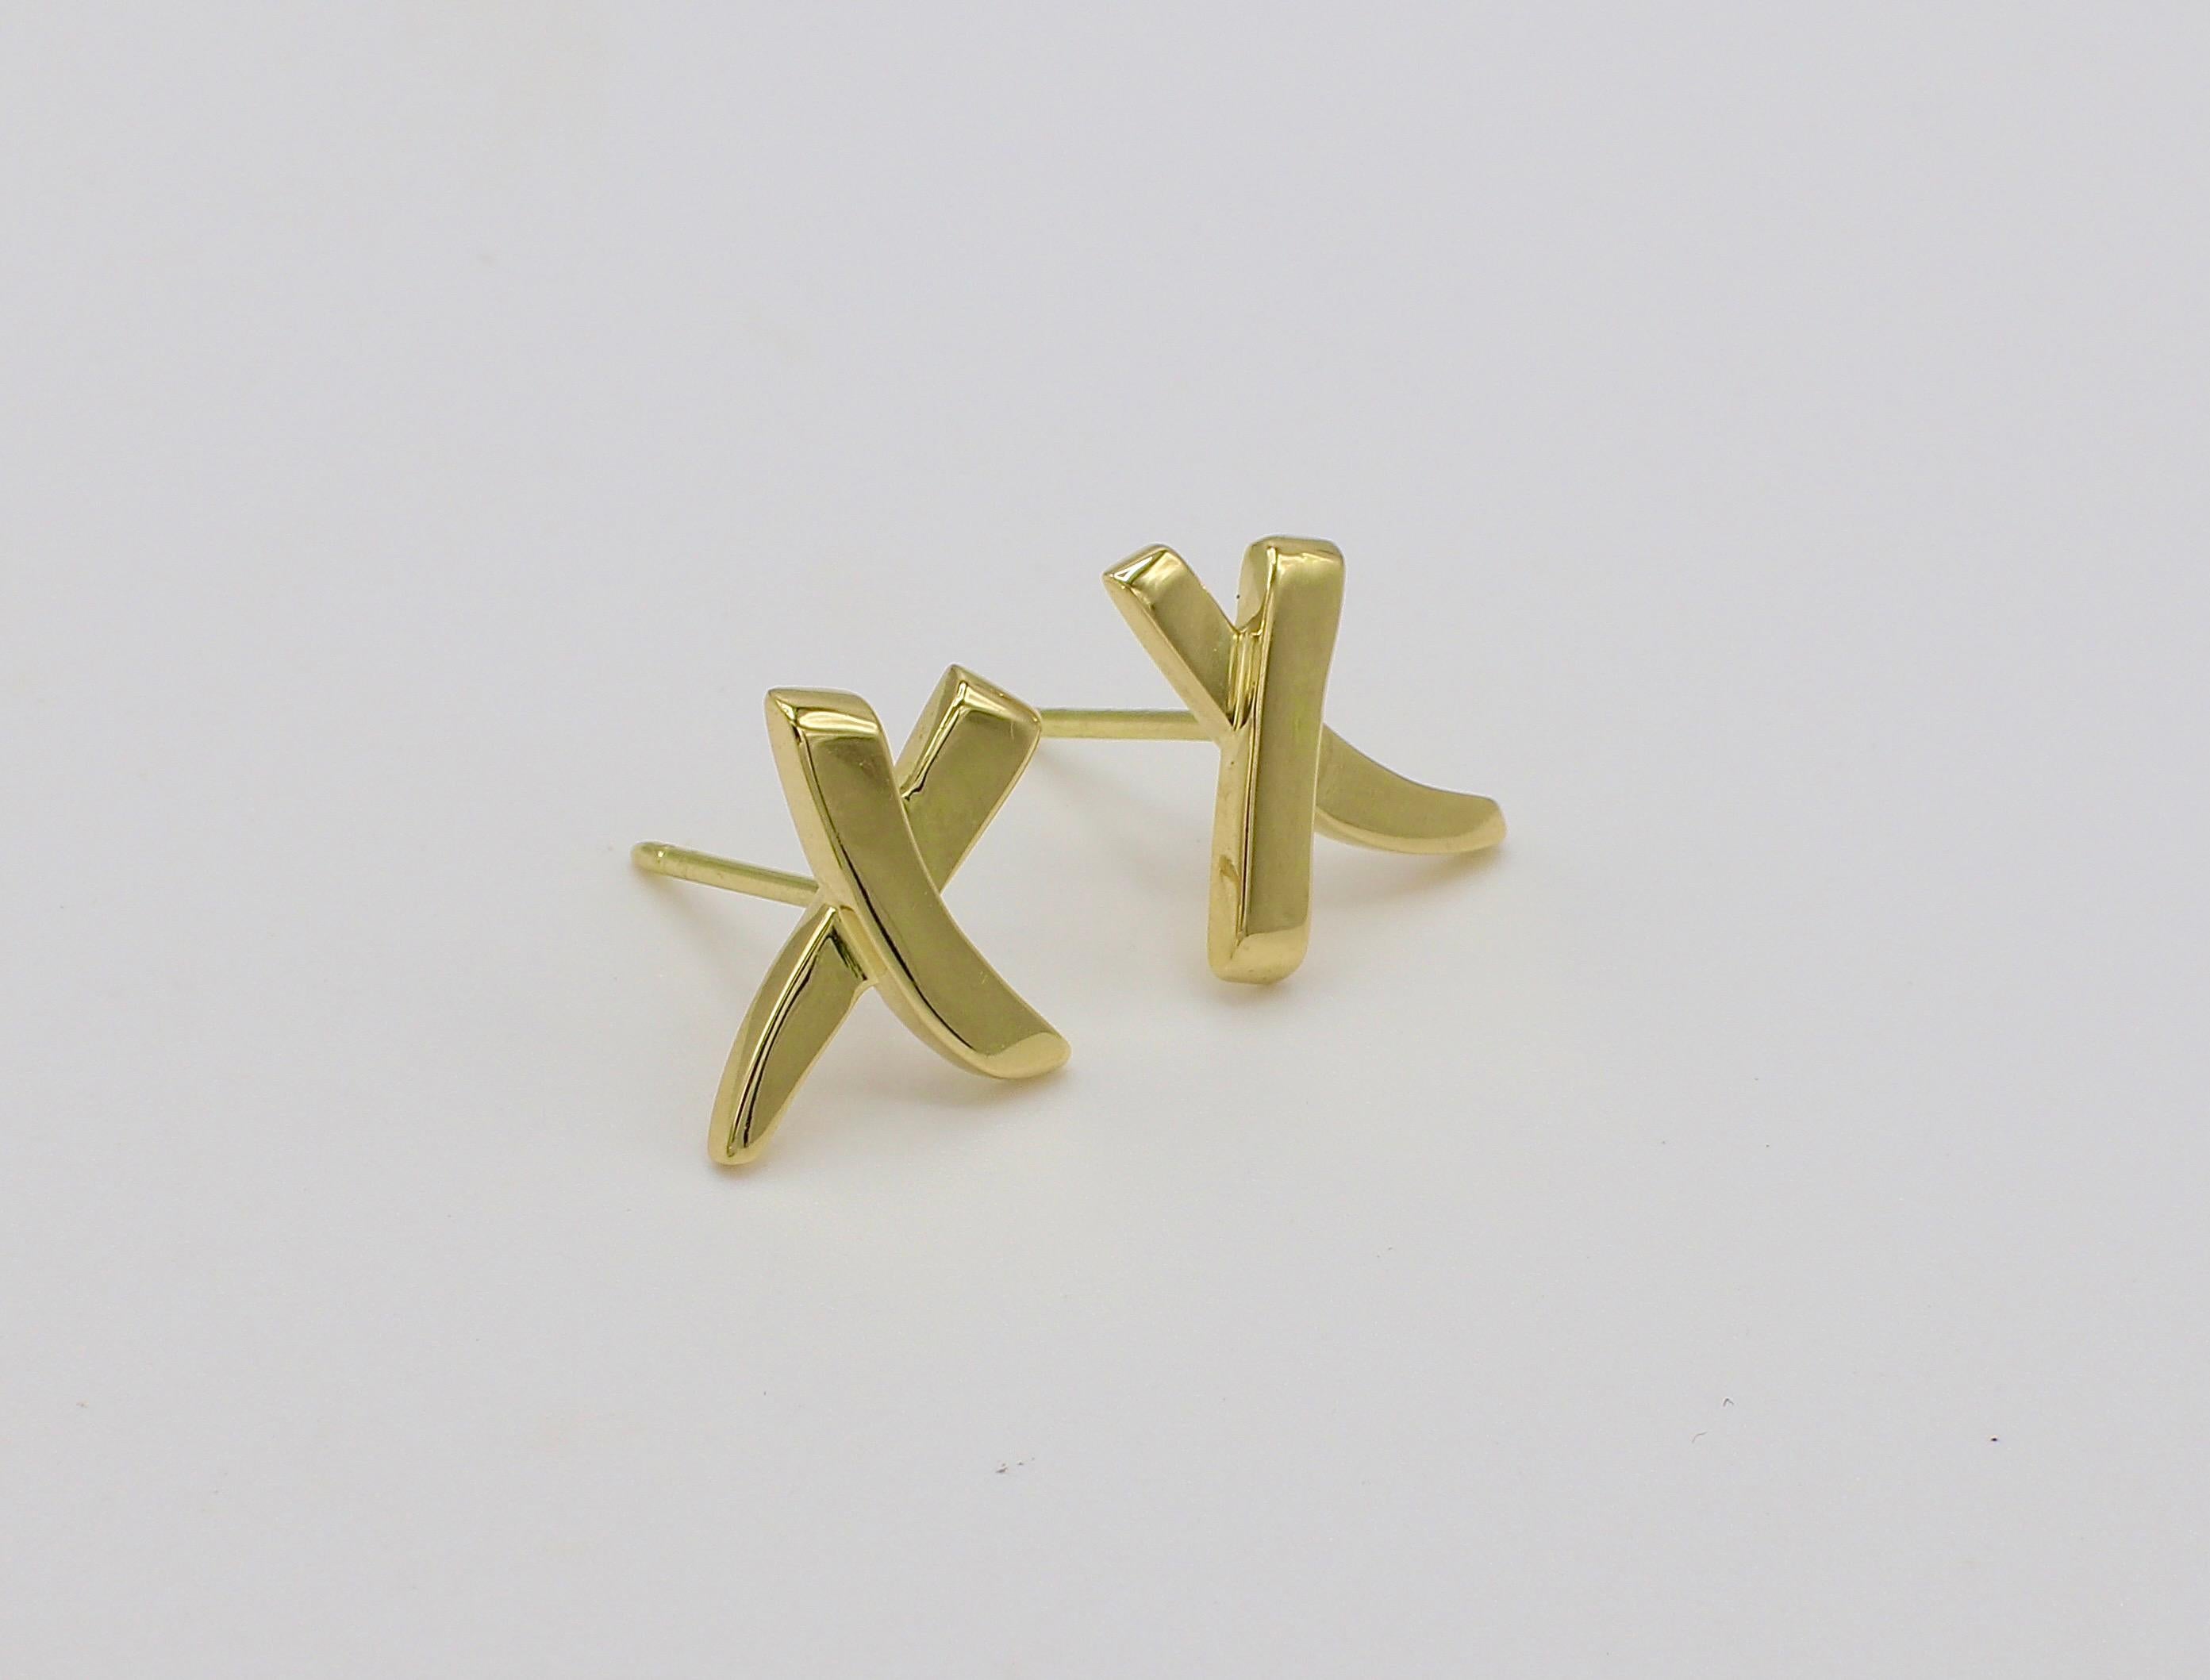 Tiffany & Co. Paloma Picasso 18K Yellow Gold Graffiti X Motif Stud Earrings 
Metal: 18k yellow gold
Weight: 3.25 grams
Length: 13.2 MM
Width: 10.5 MM
Signed: 